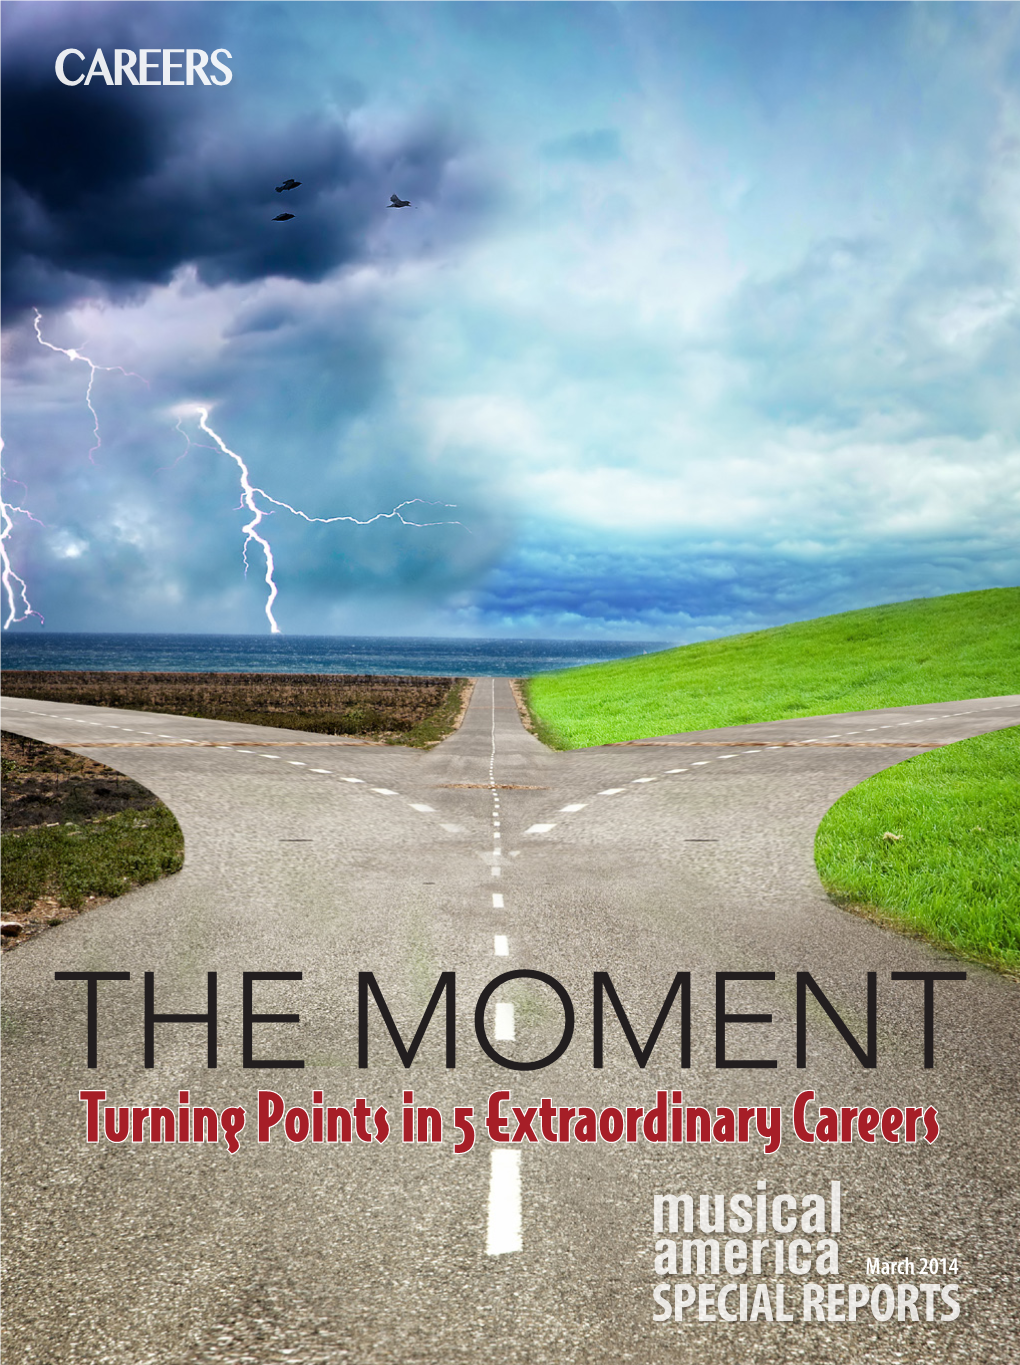 Turning Points in 5 Extraordinary Careers CAREERS